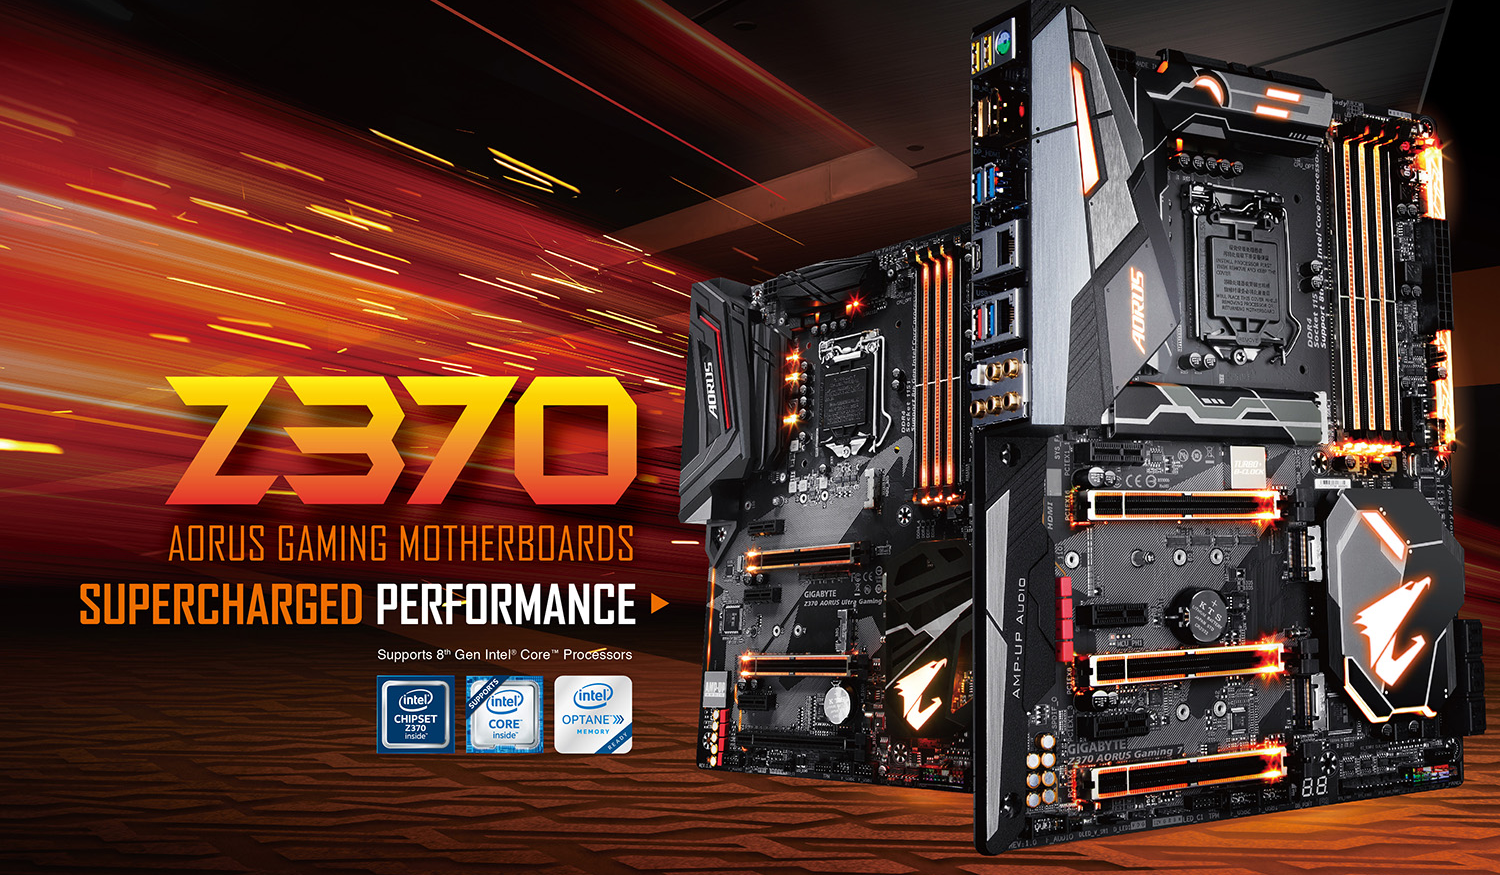 Z370 AORUS Motherboards with Supercharged Performance | AORUS